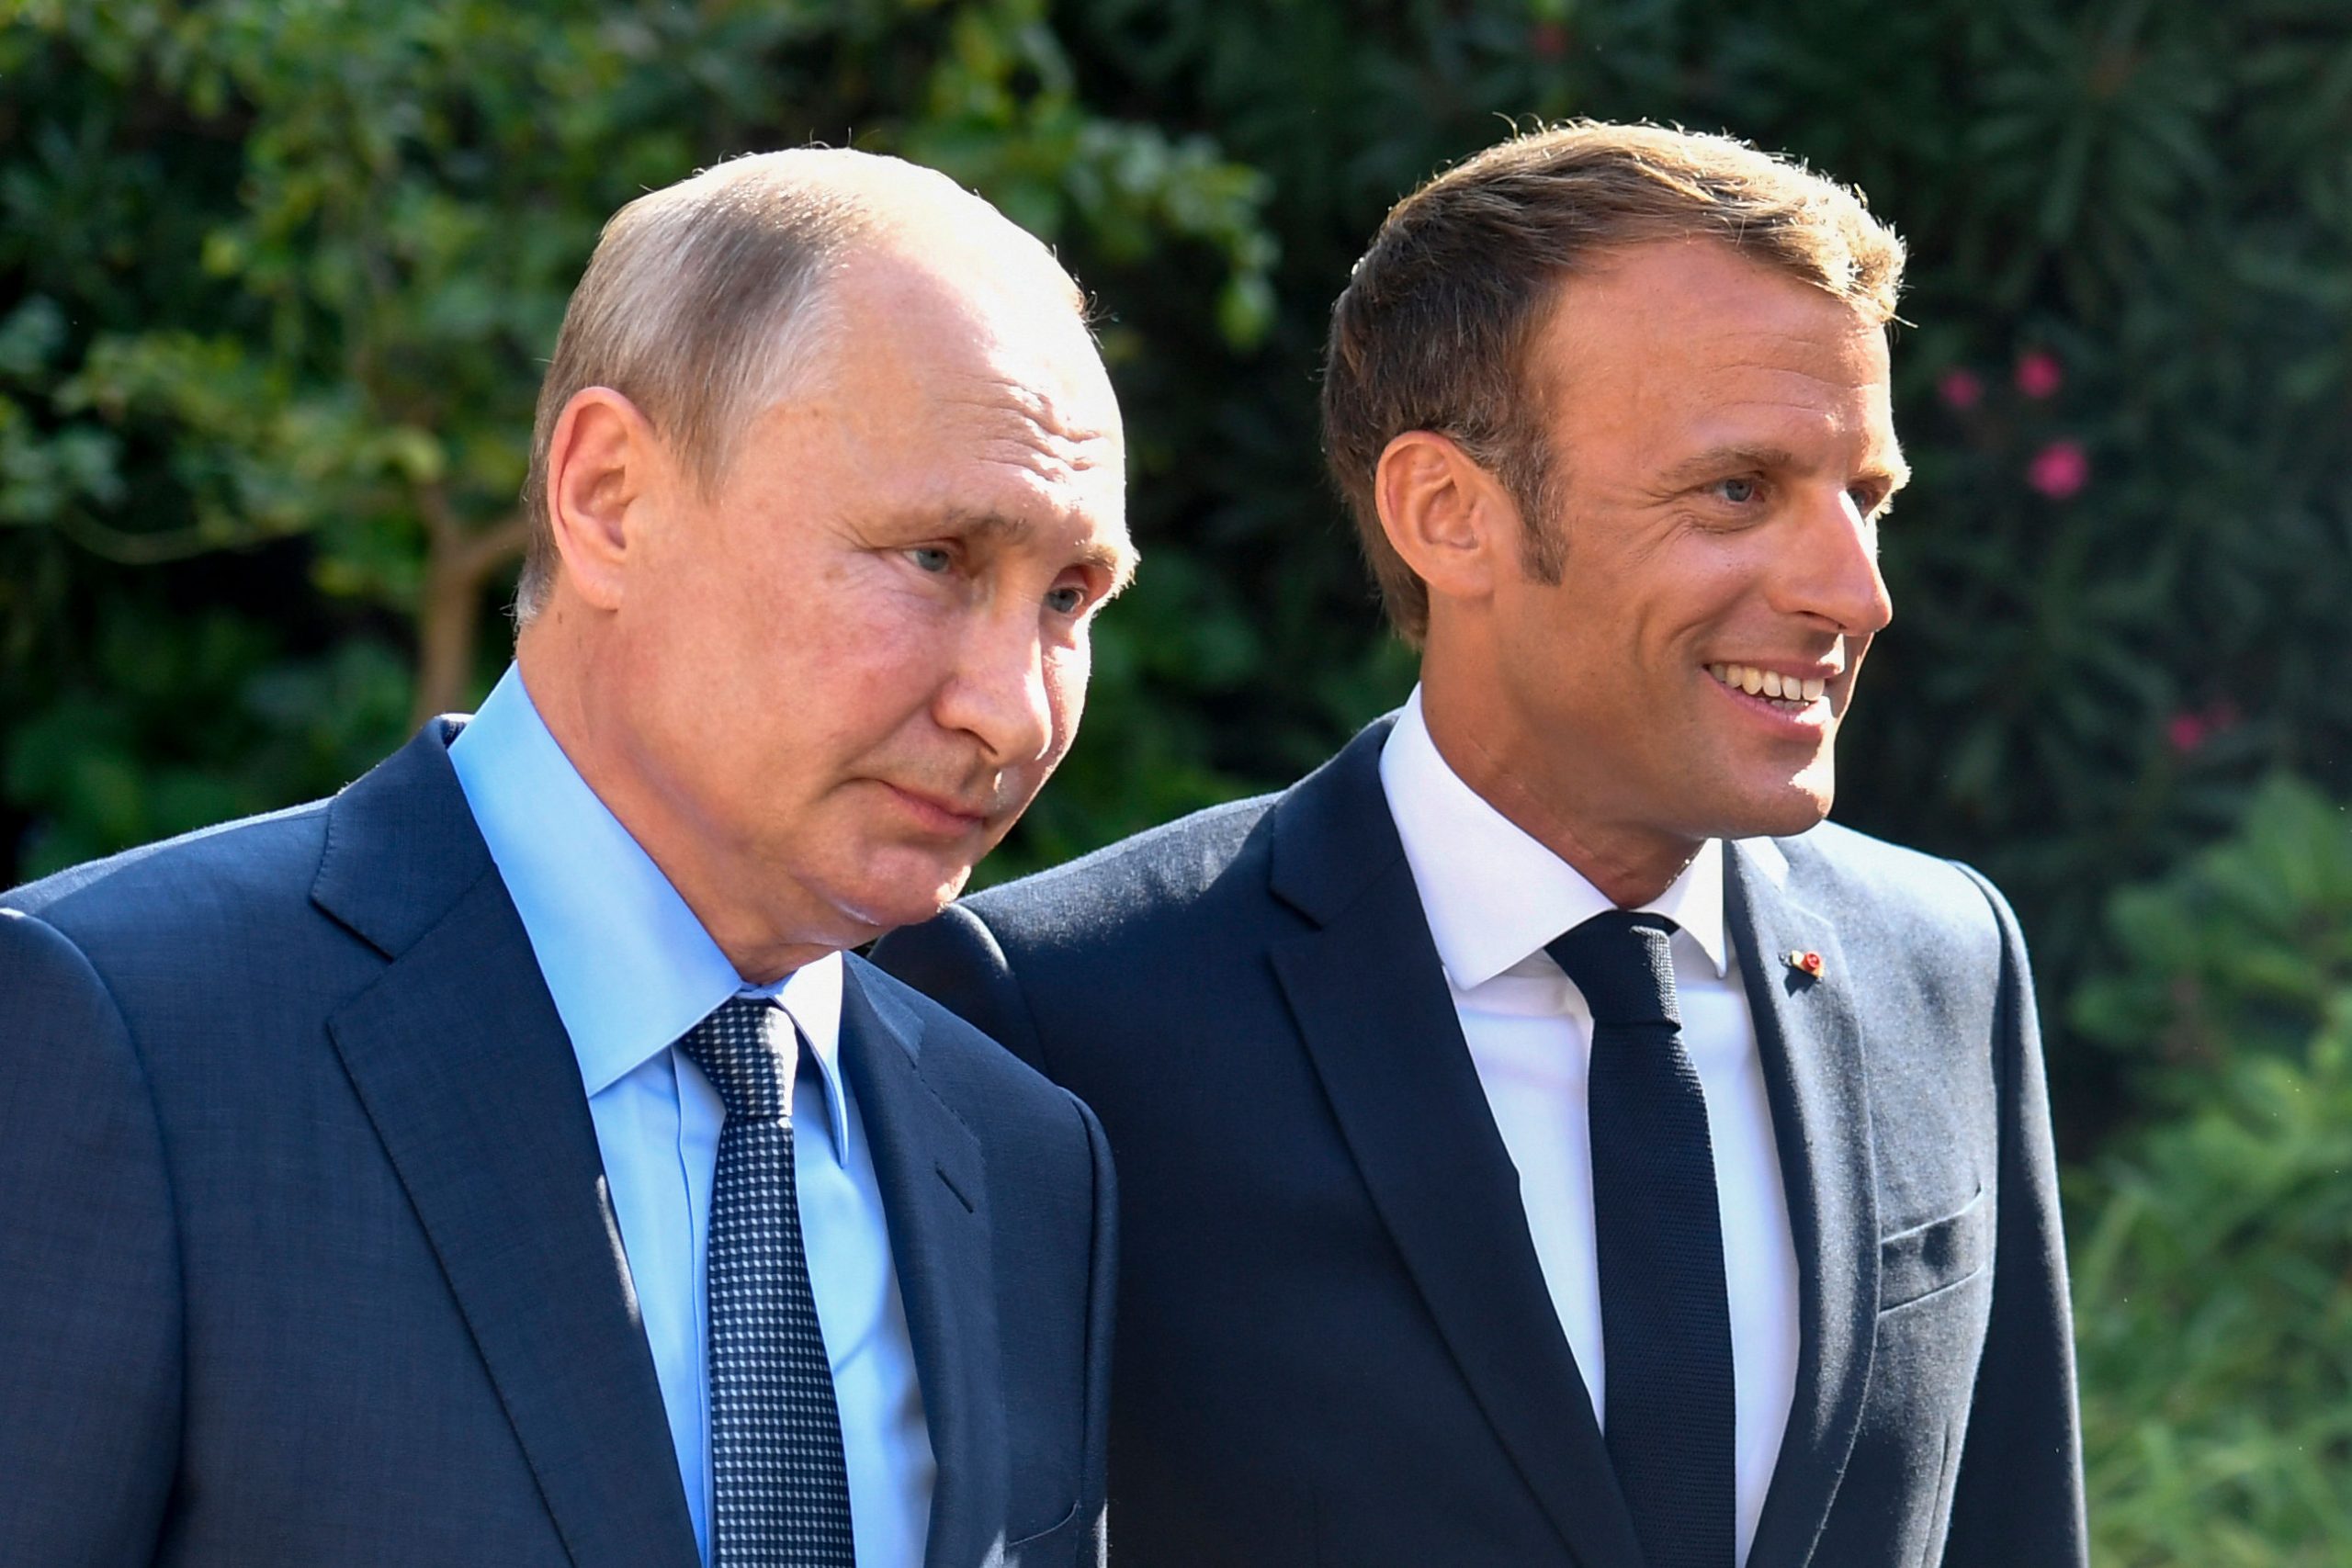 Putin gave no hint of Ukraine invasion in call with Macron: French officials